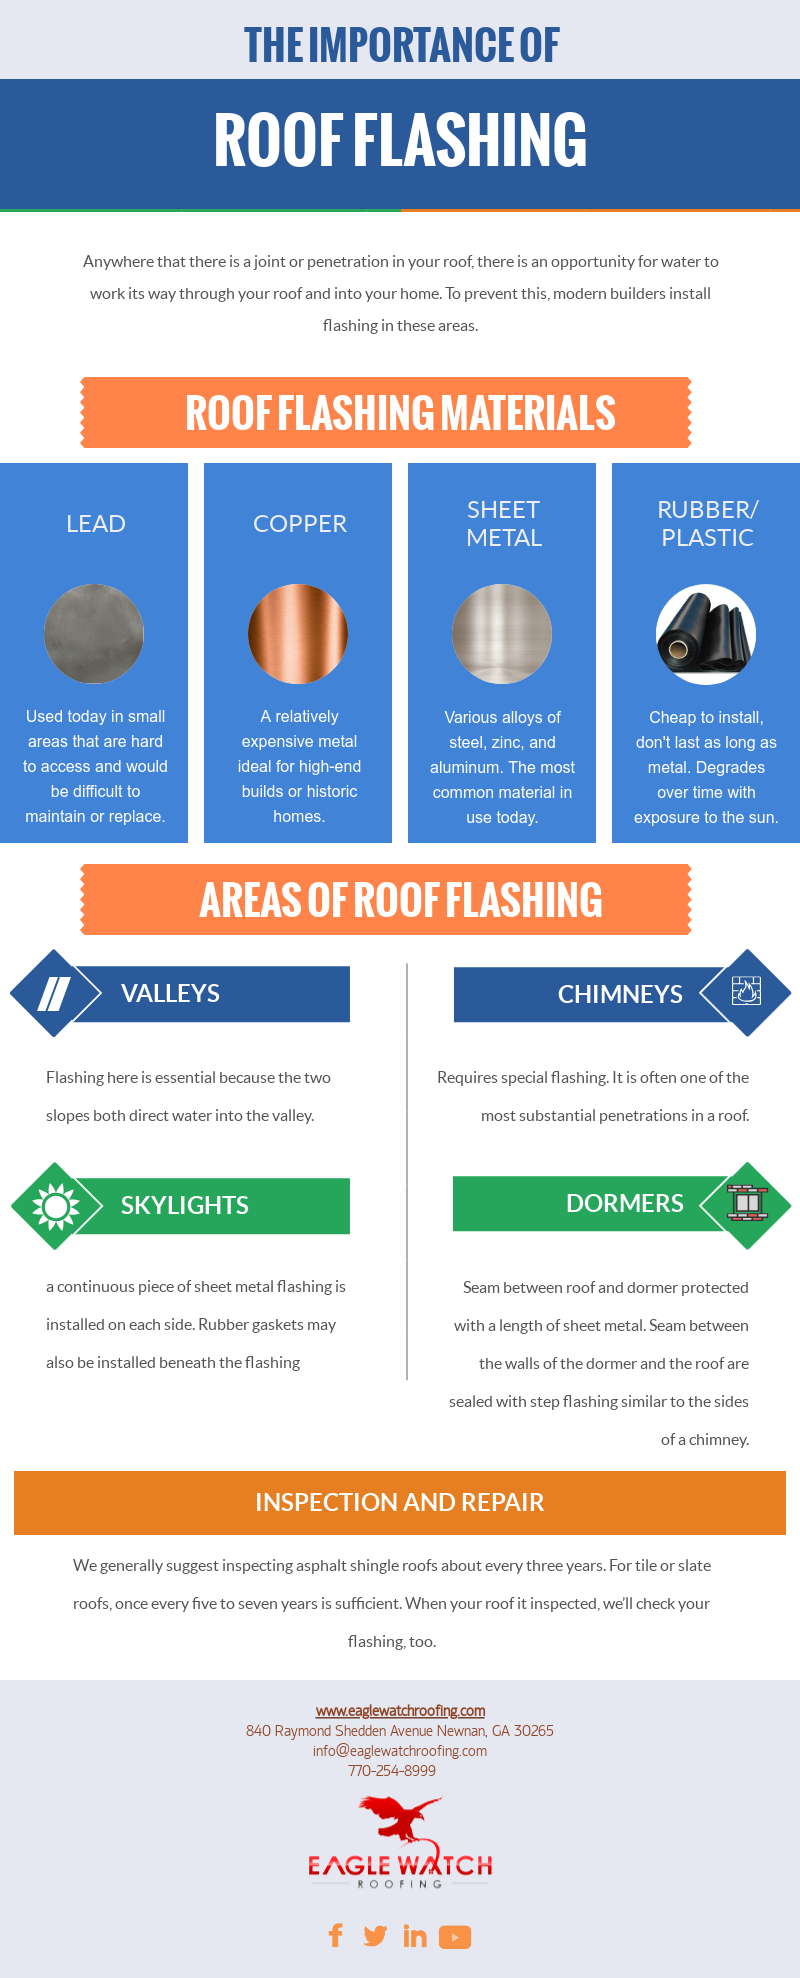 The Importance of Roof Flashing [infographic]